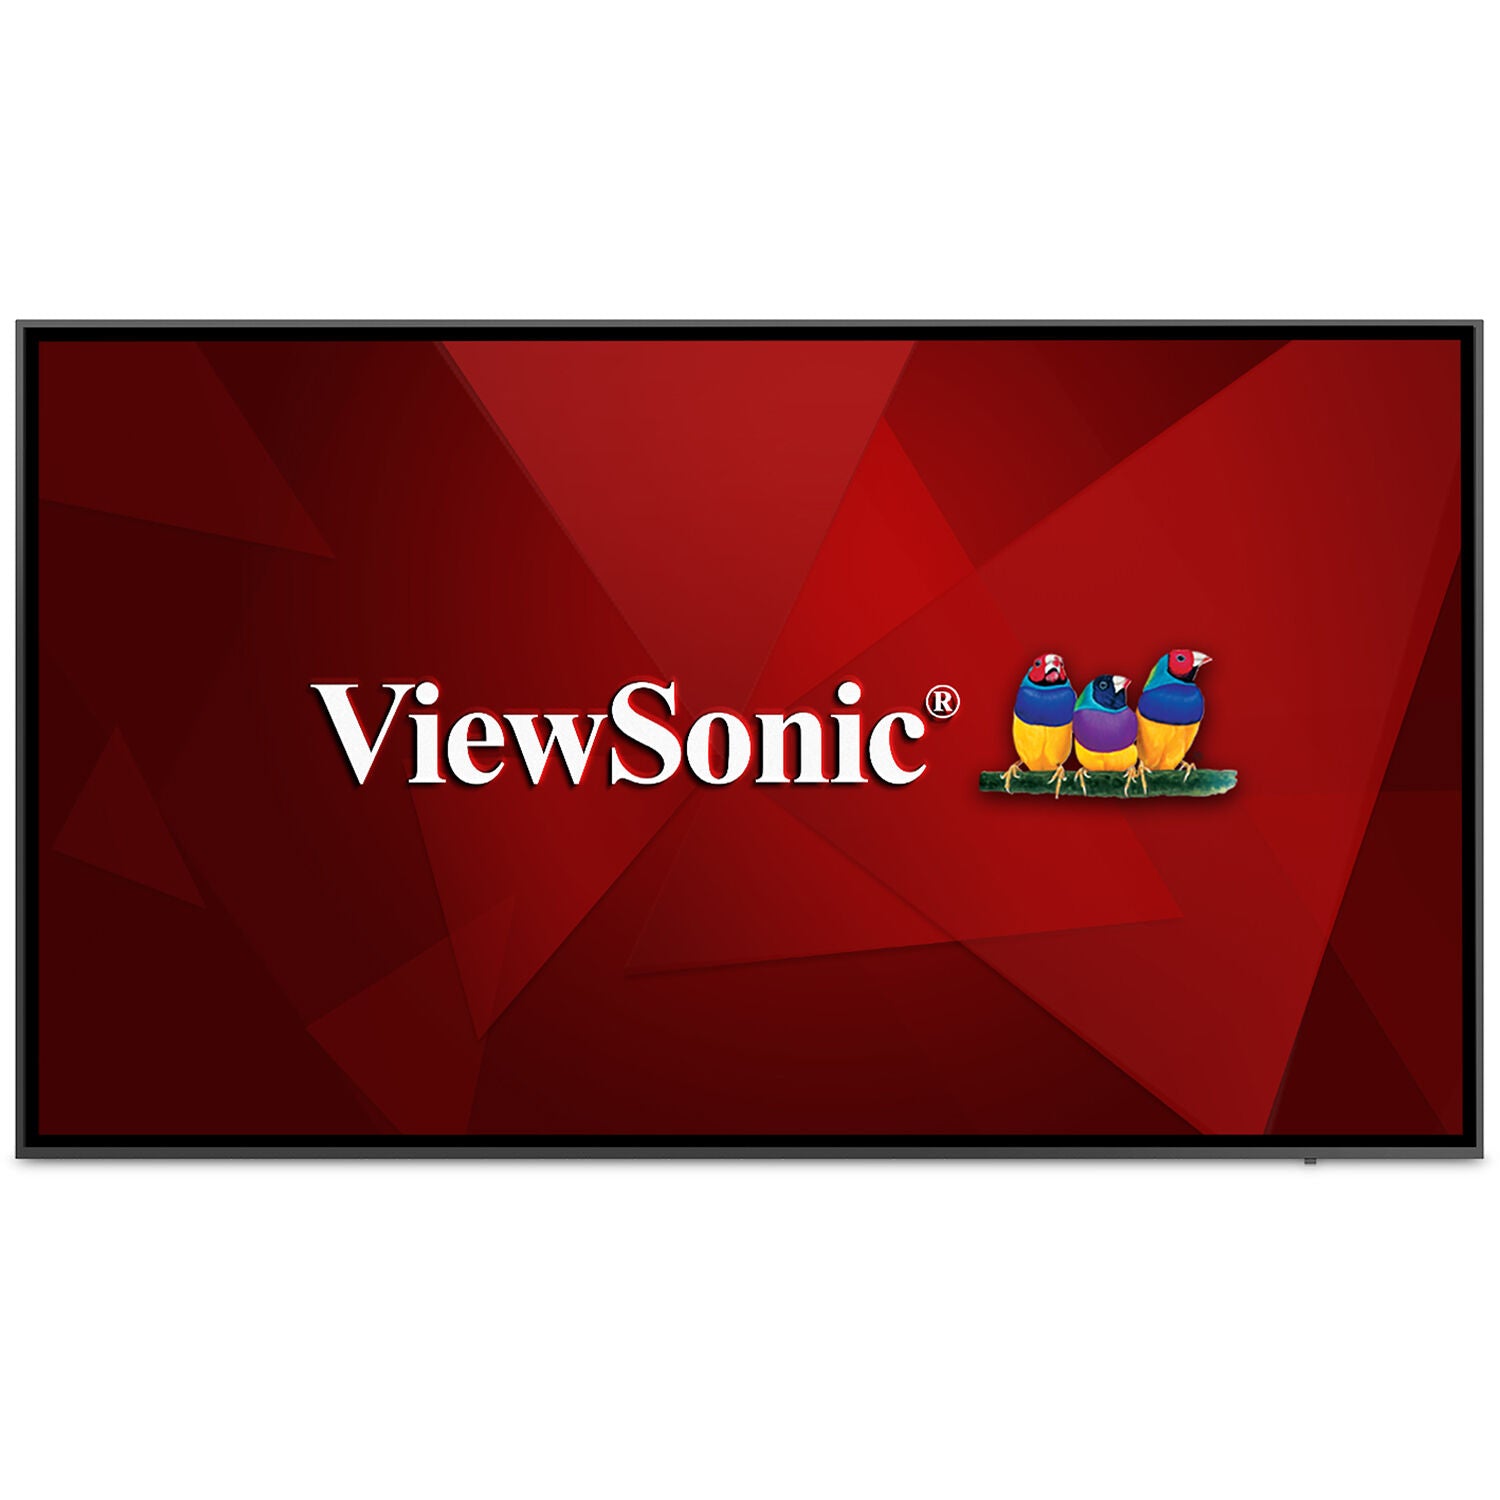 ViewSonic CDE8620-W 86" Class 4K UHD Digital Signage and Conference Room LED Display - Certified Refurbished